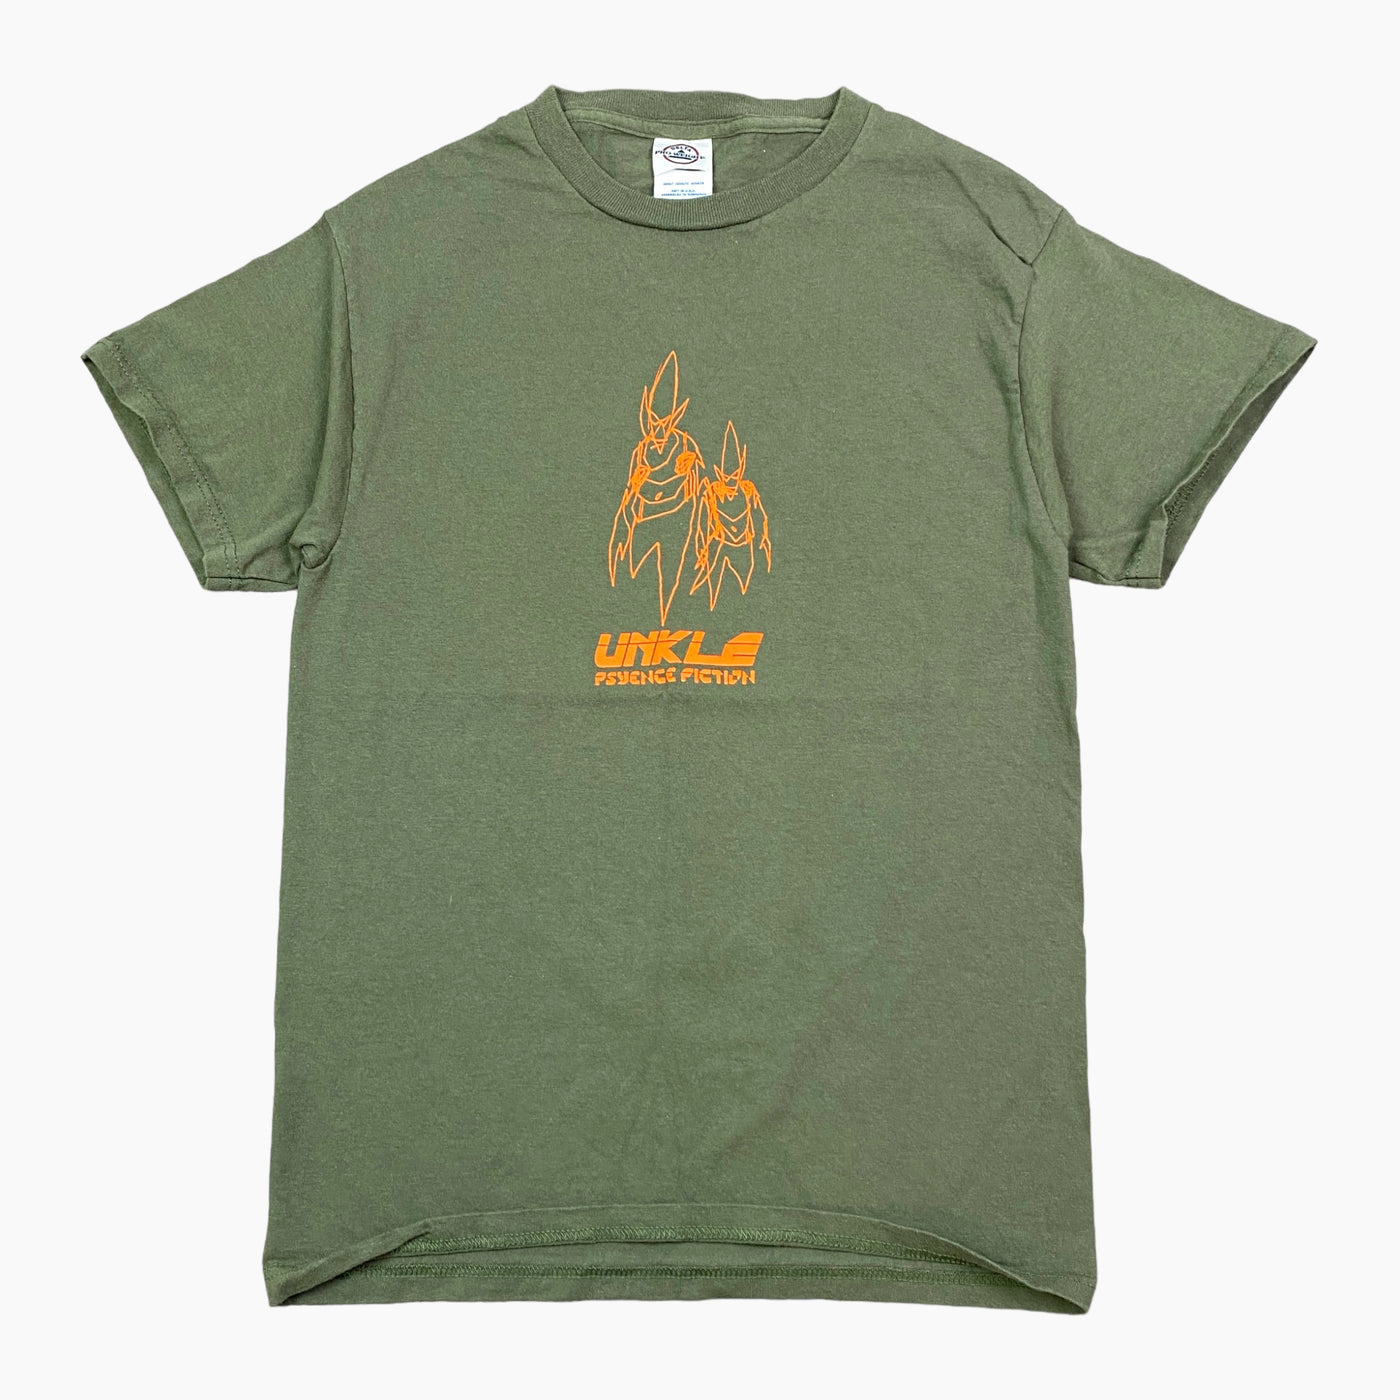 00S UNKLE T-SHIRT